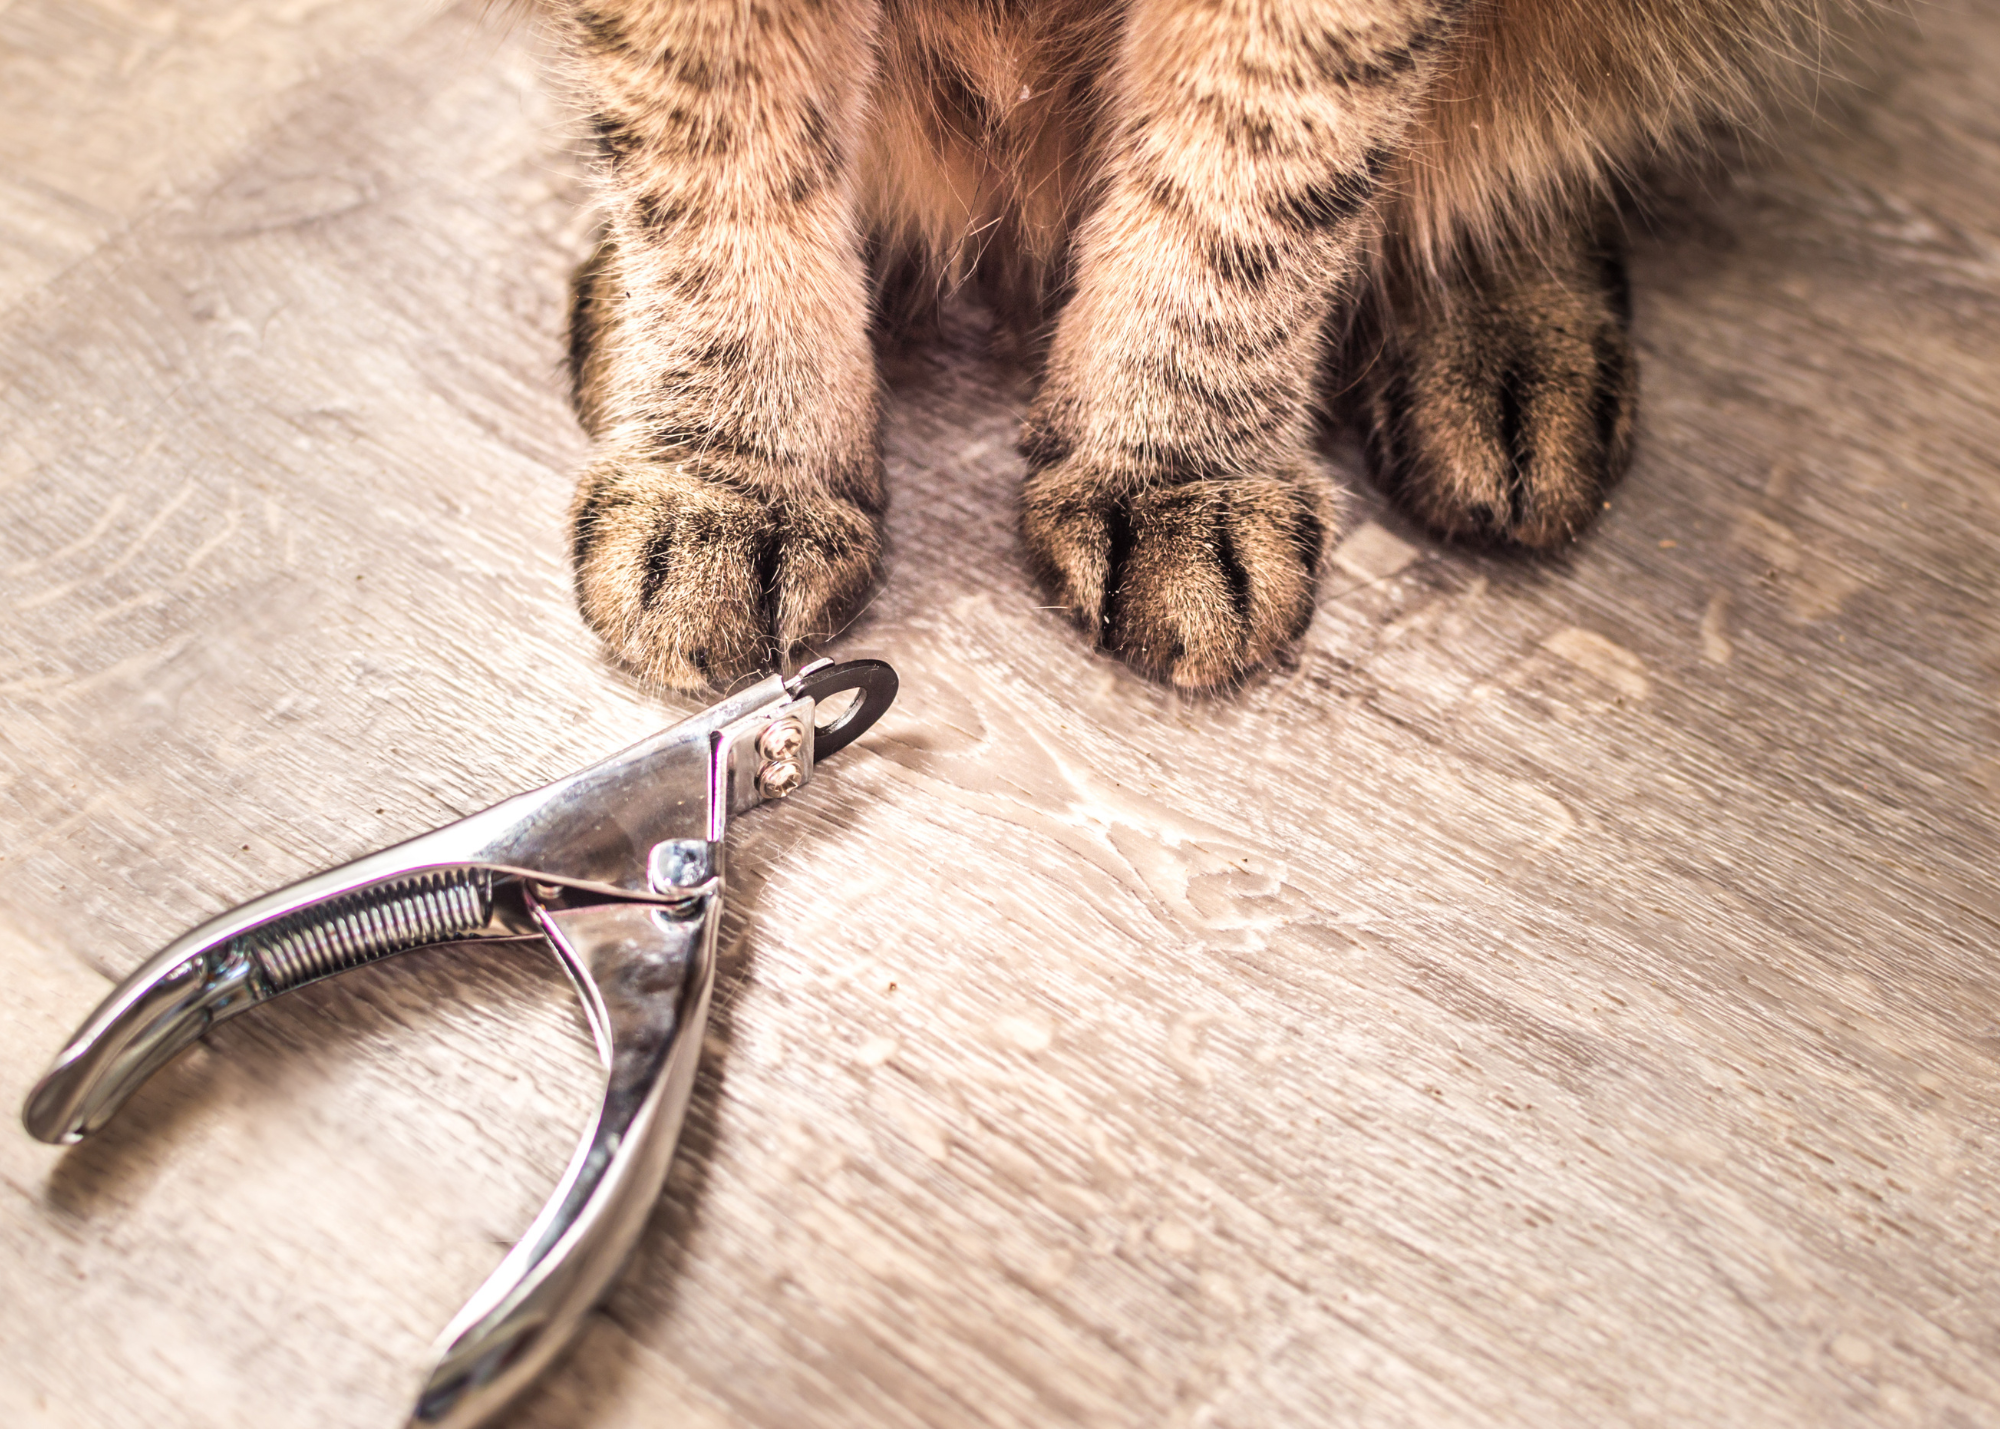 cat nail clippers beside cat paws